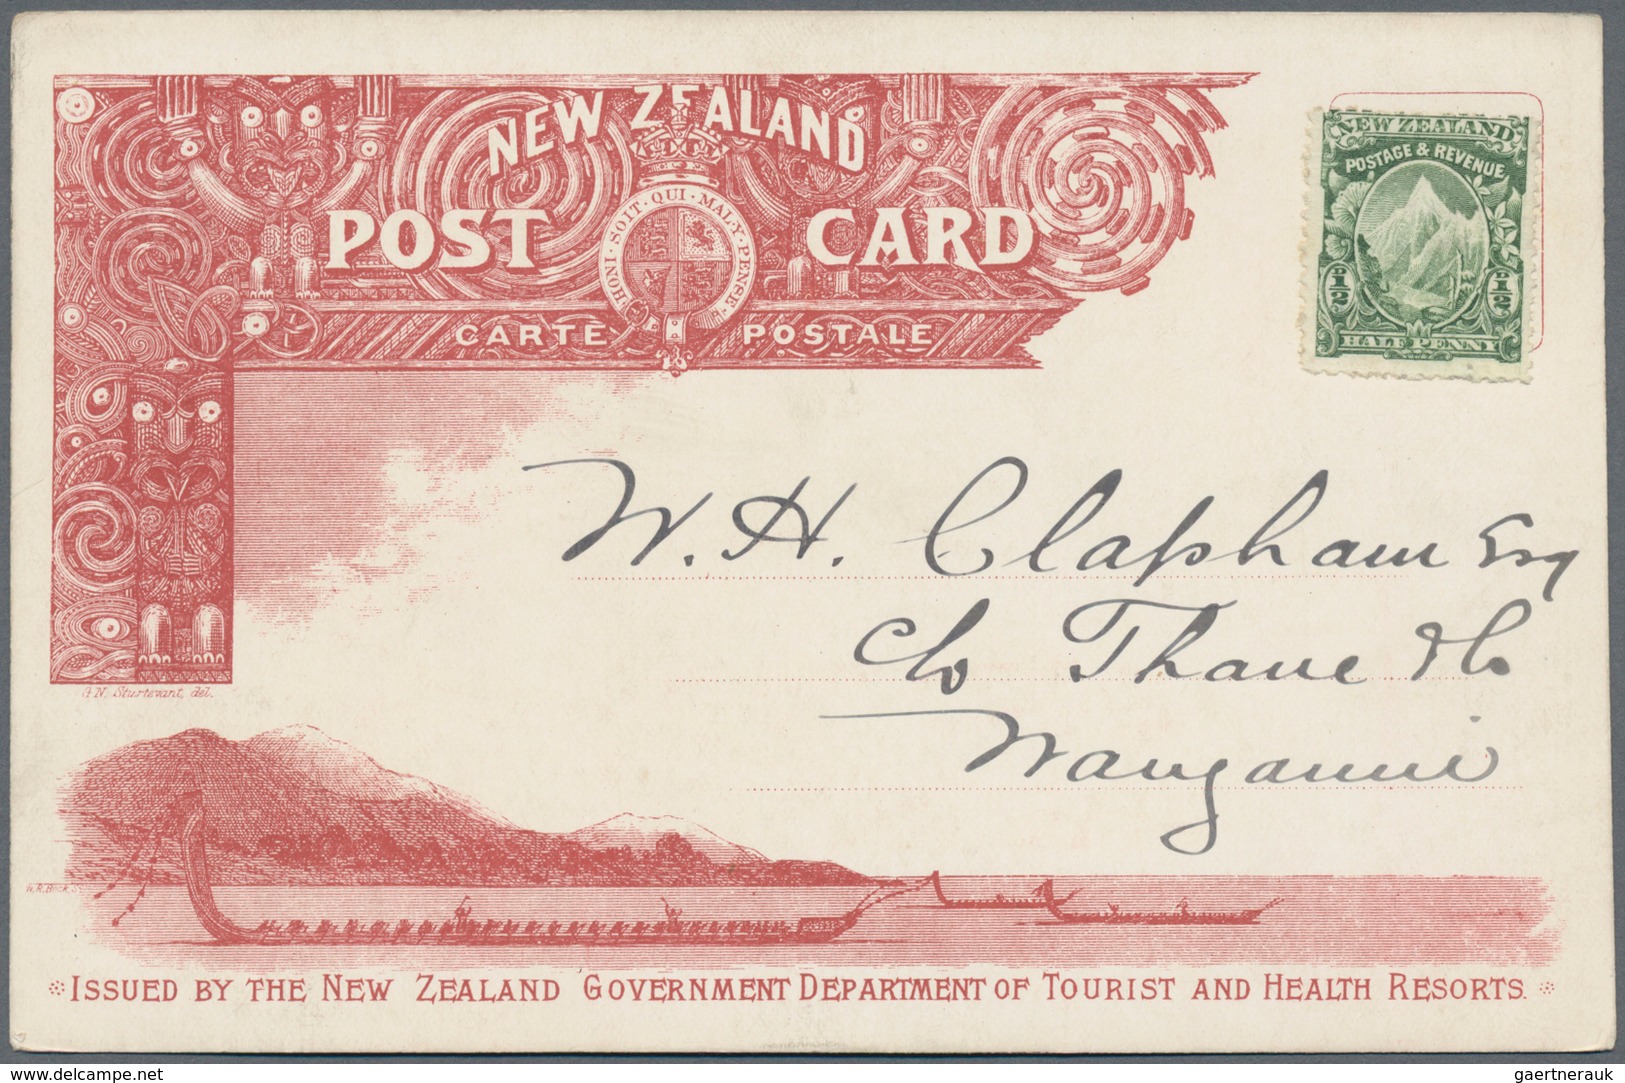 Neuseeland: 1903 (15.6.), nine different picture postcards 'Issued by the New Zealand Government Dep